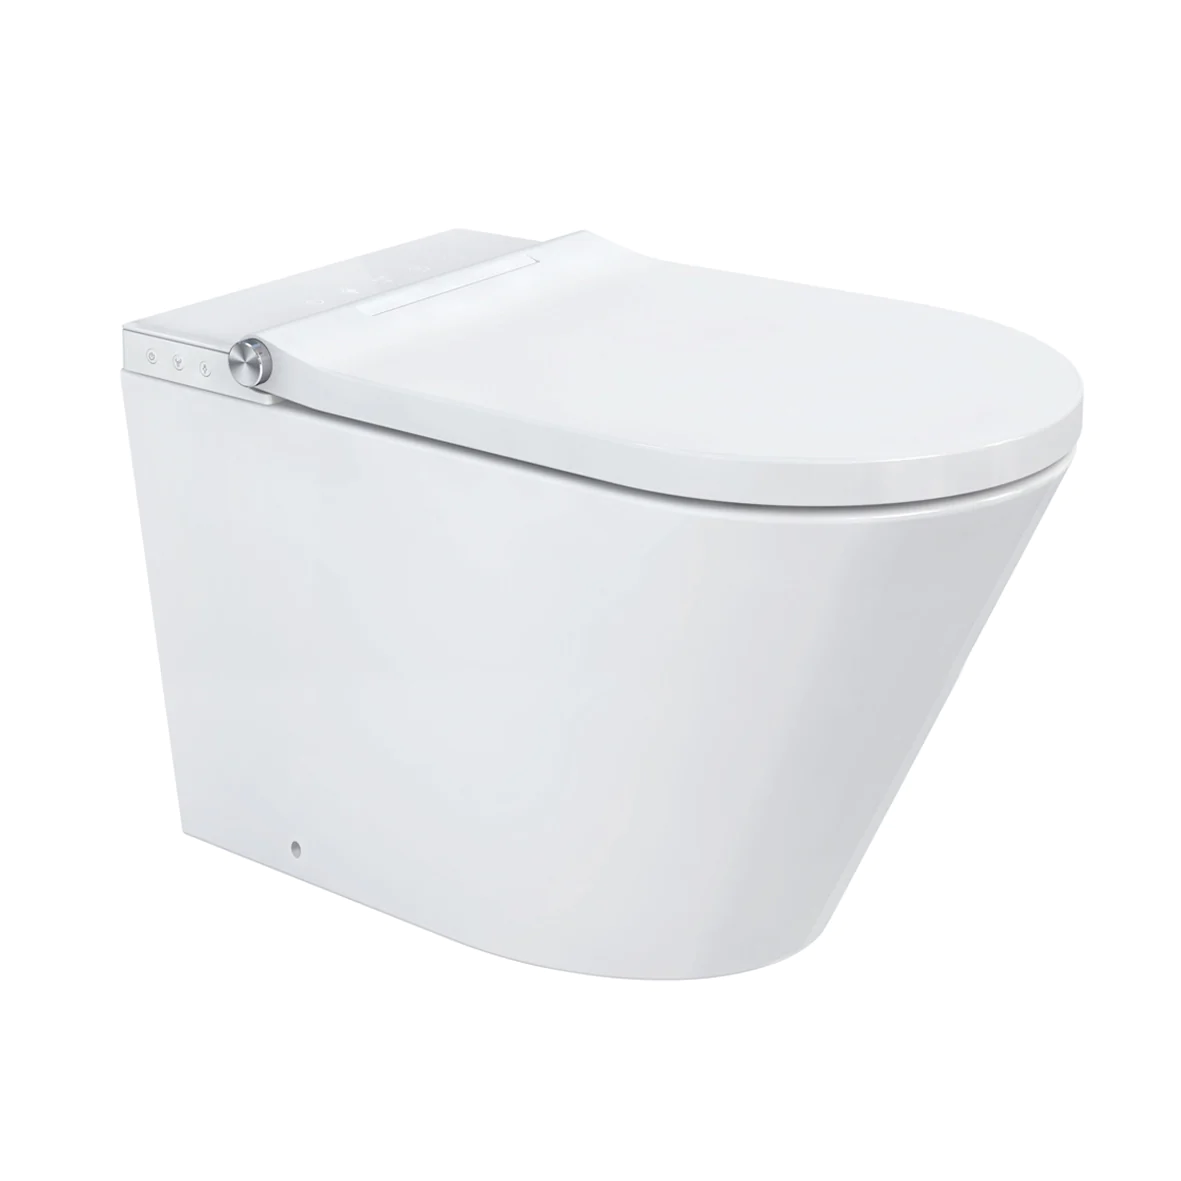 VEROTTI ETERNITY X INTEGRATED INTELLIGENT WALL FACED TOILET AND REMOTE WASHLET PACKAGE GLOSS WHITE